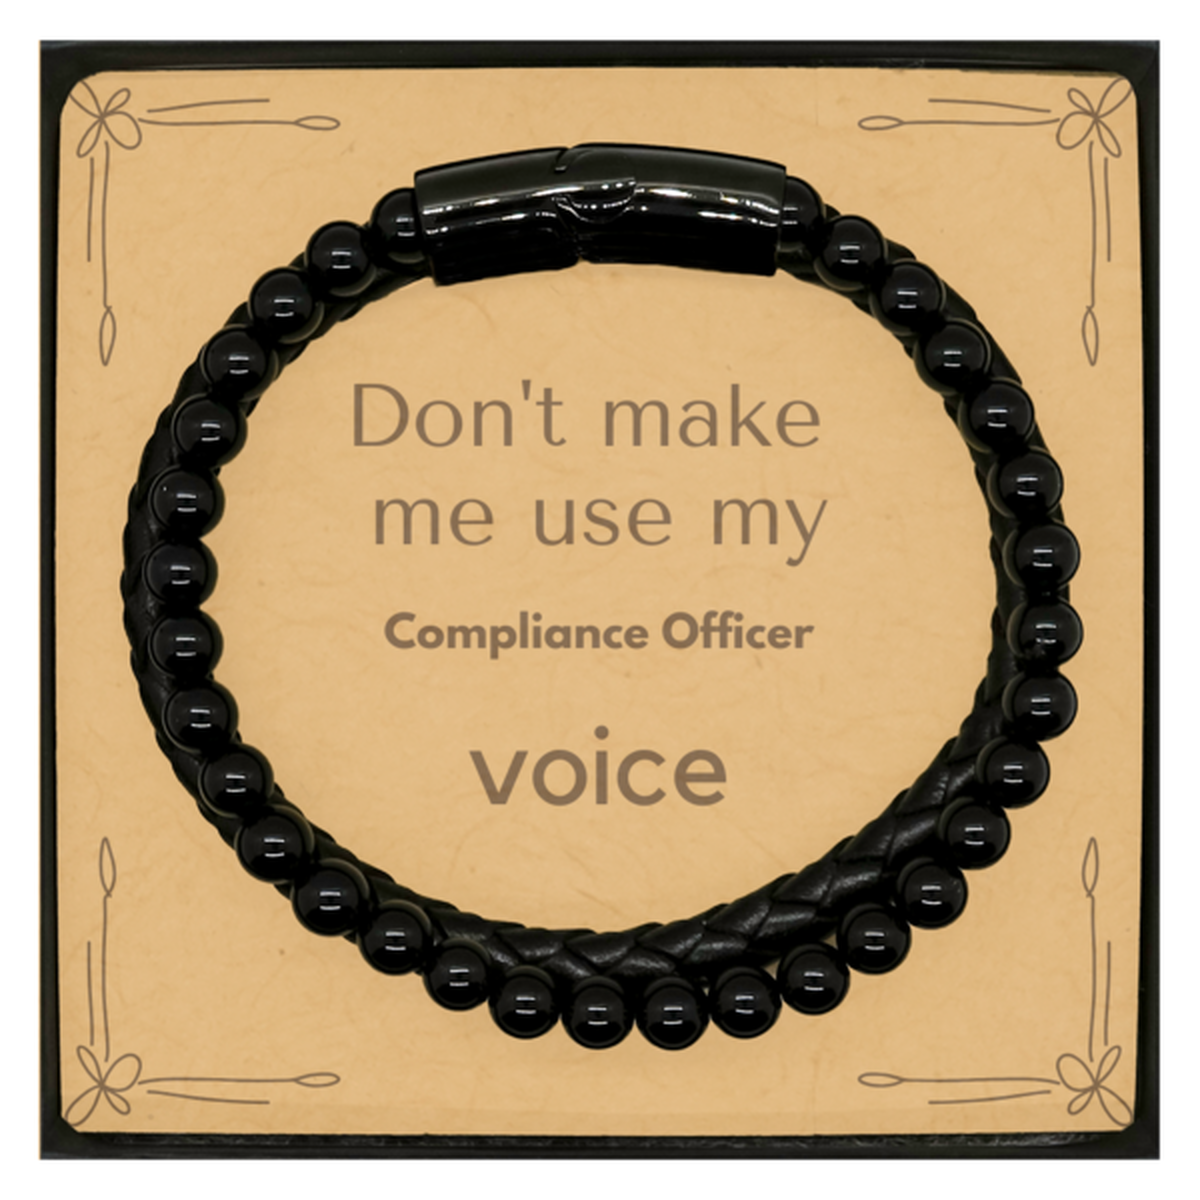 Don't make me use my Compliance Officer voice, Sarcasm Compliance Officer Card Gifts, Christmas Compliance Officer Stone Leather Bracelets Birthday Unique Gifts For Compliance Officer Coworkers, Men, Women, Colleague, Friends